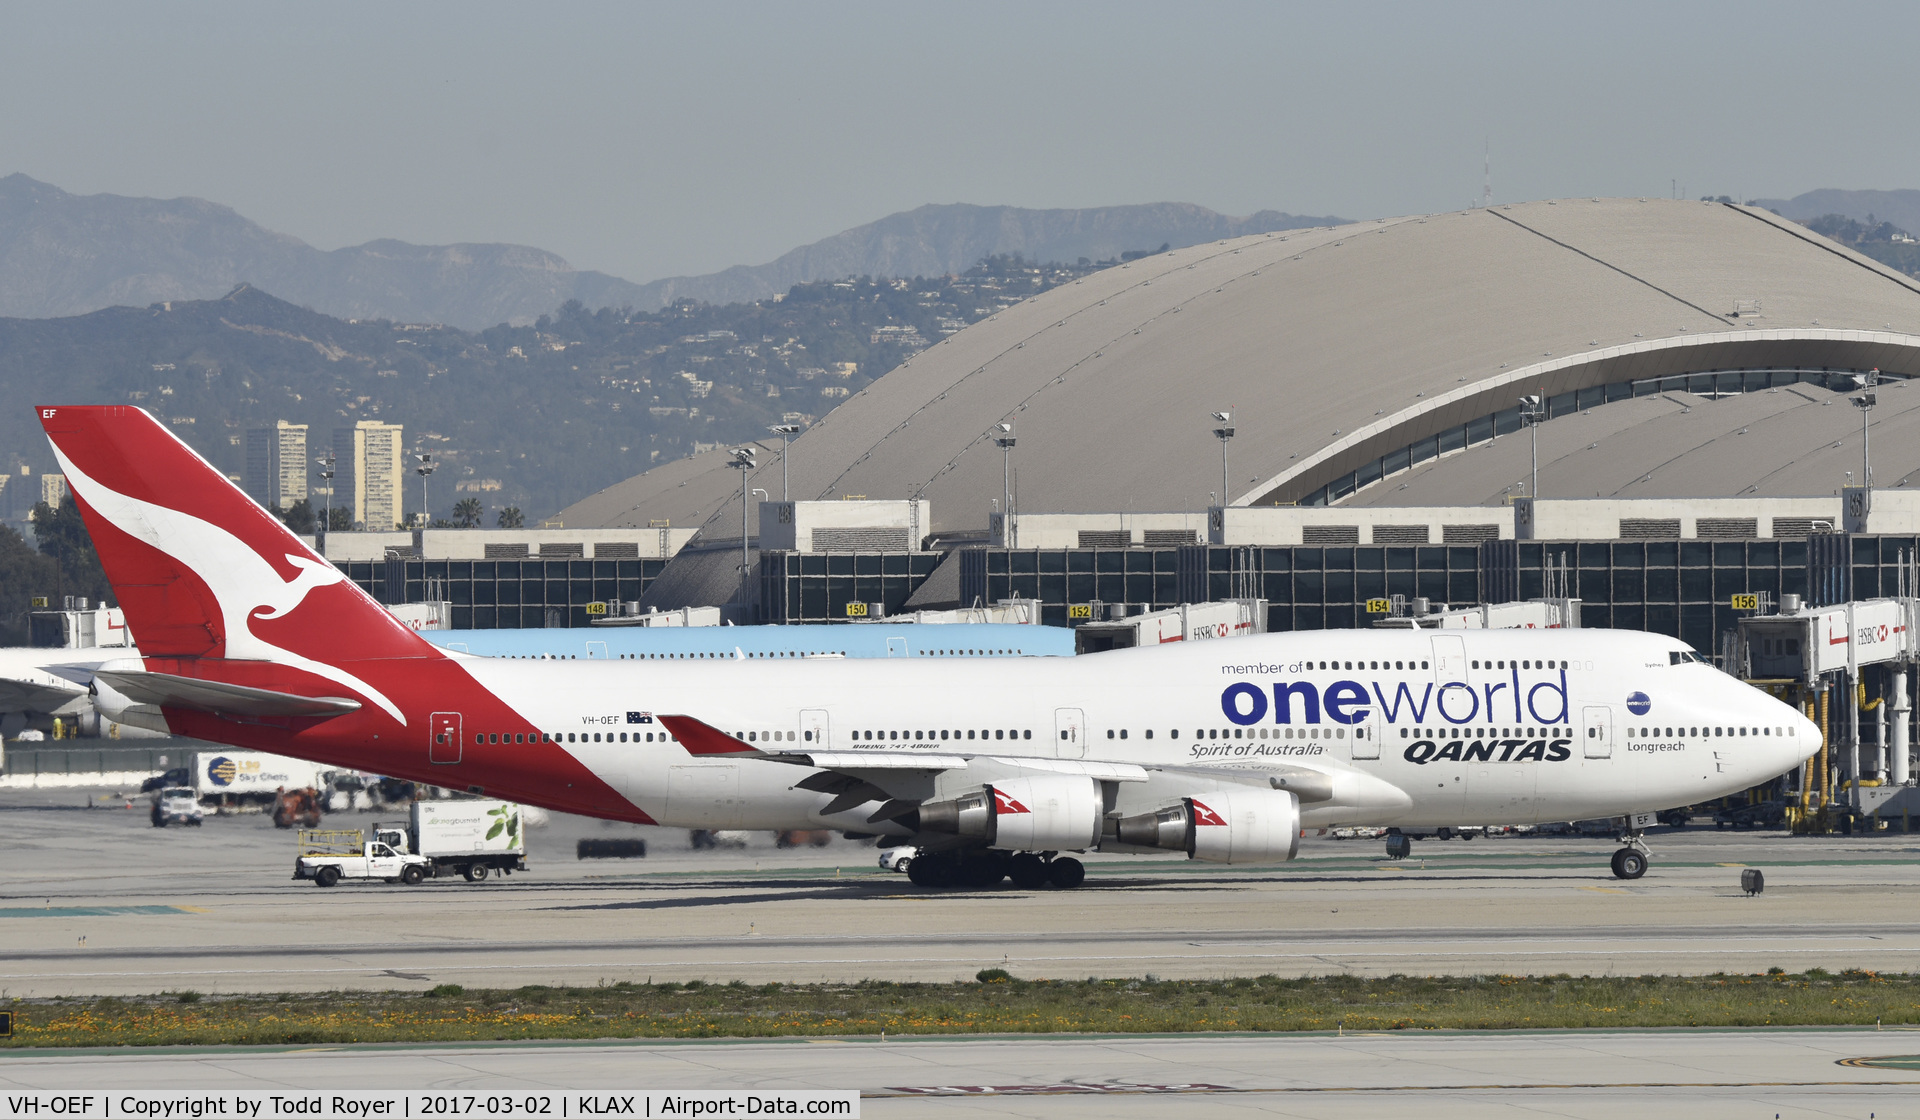 VH-OEF, 2002 Boeing 747-438/ER C/N 32910, Taxiing for departure at LAX